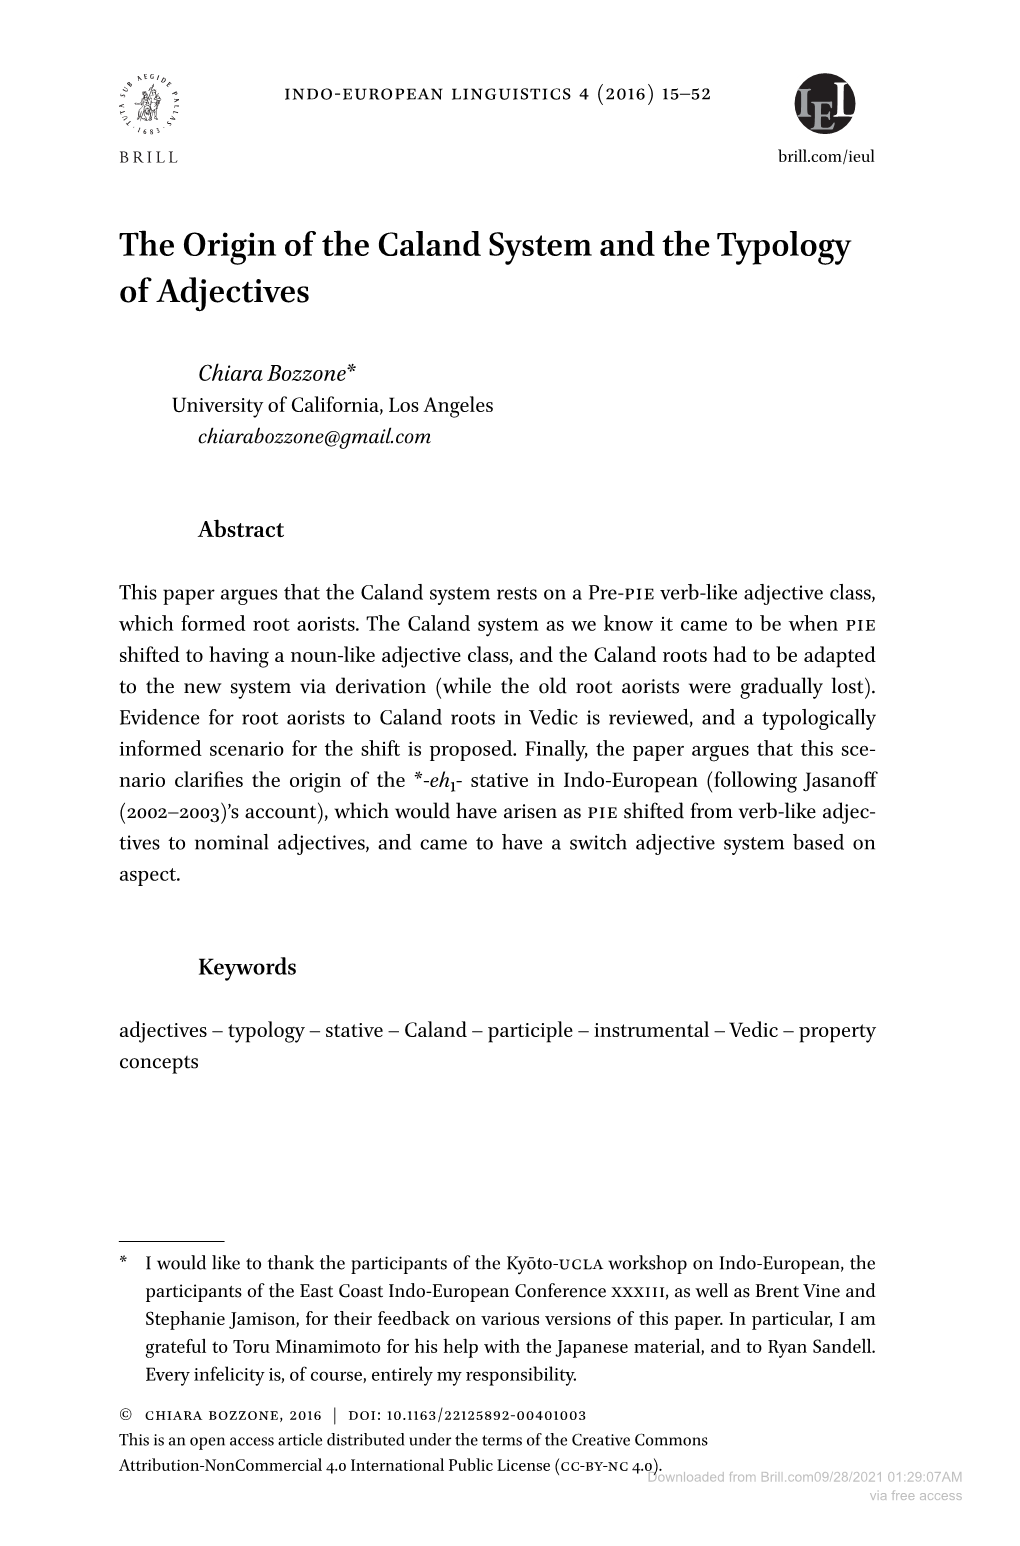 The Origin of the Caland System and Thetypology of Adjectives